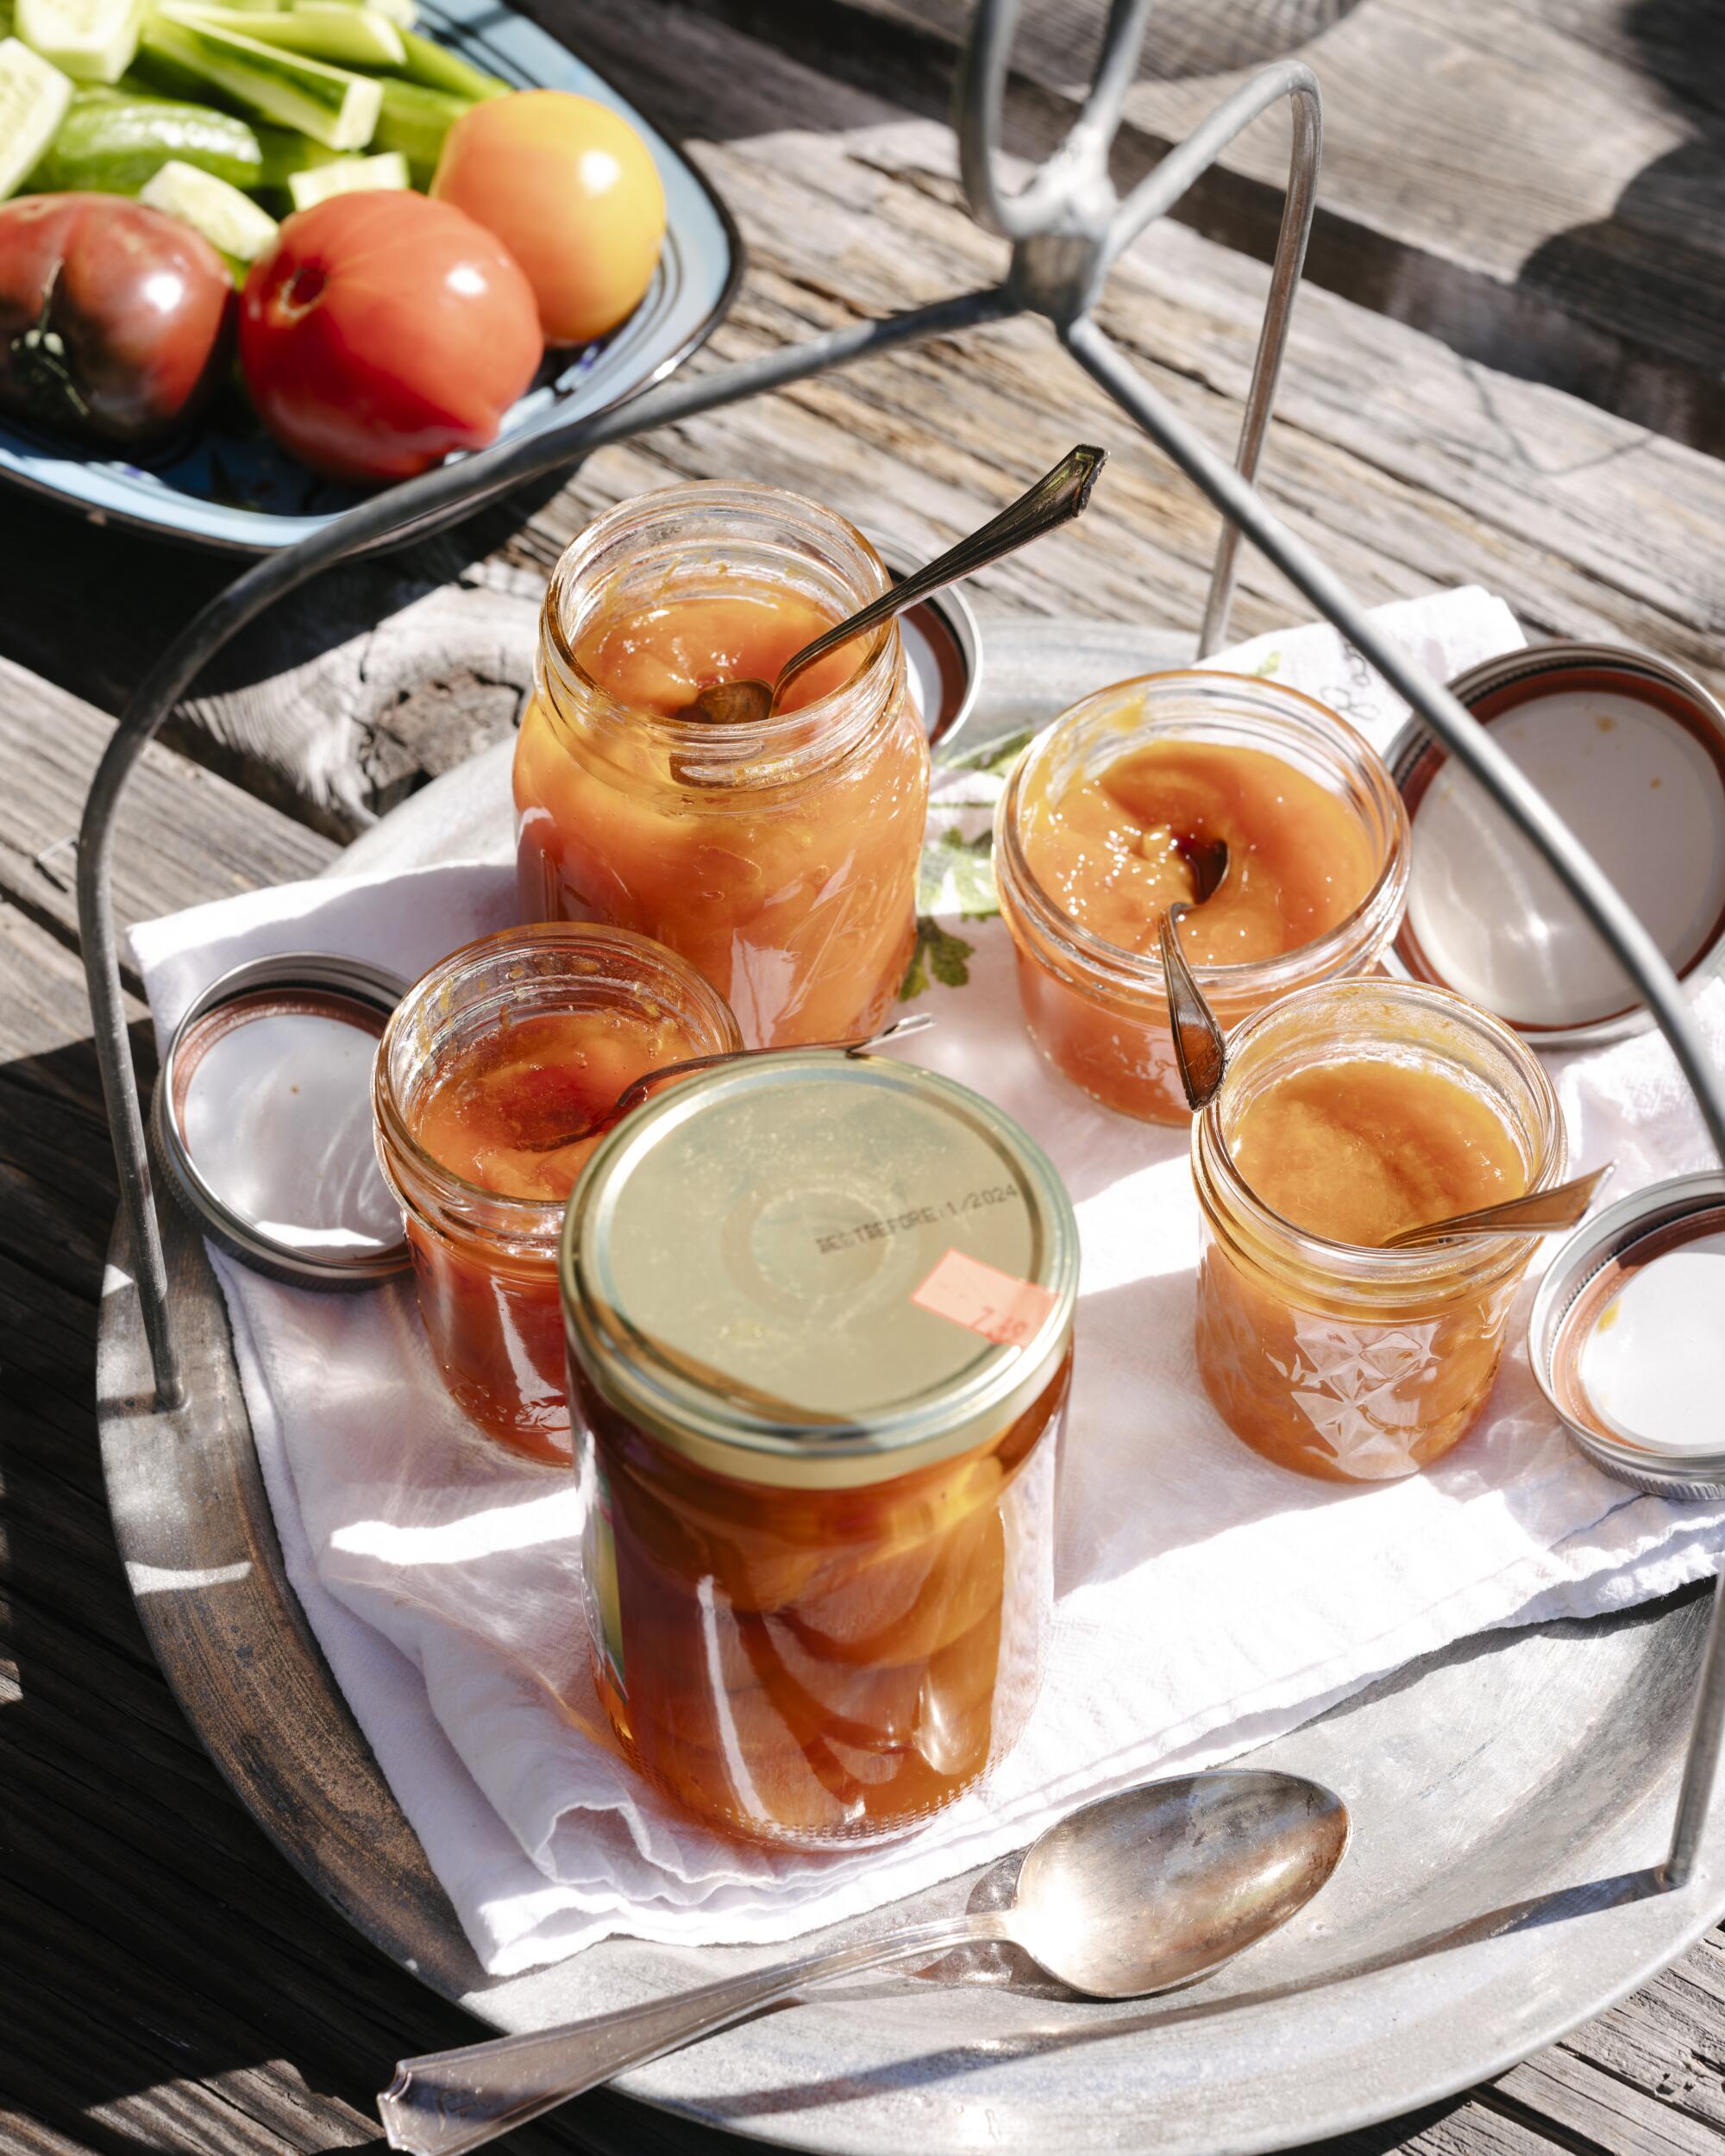 Amer Budayr's apricot jams from different batches on a table outdoors.